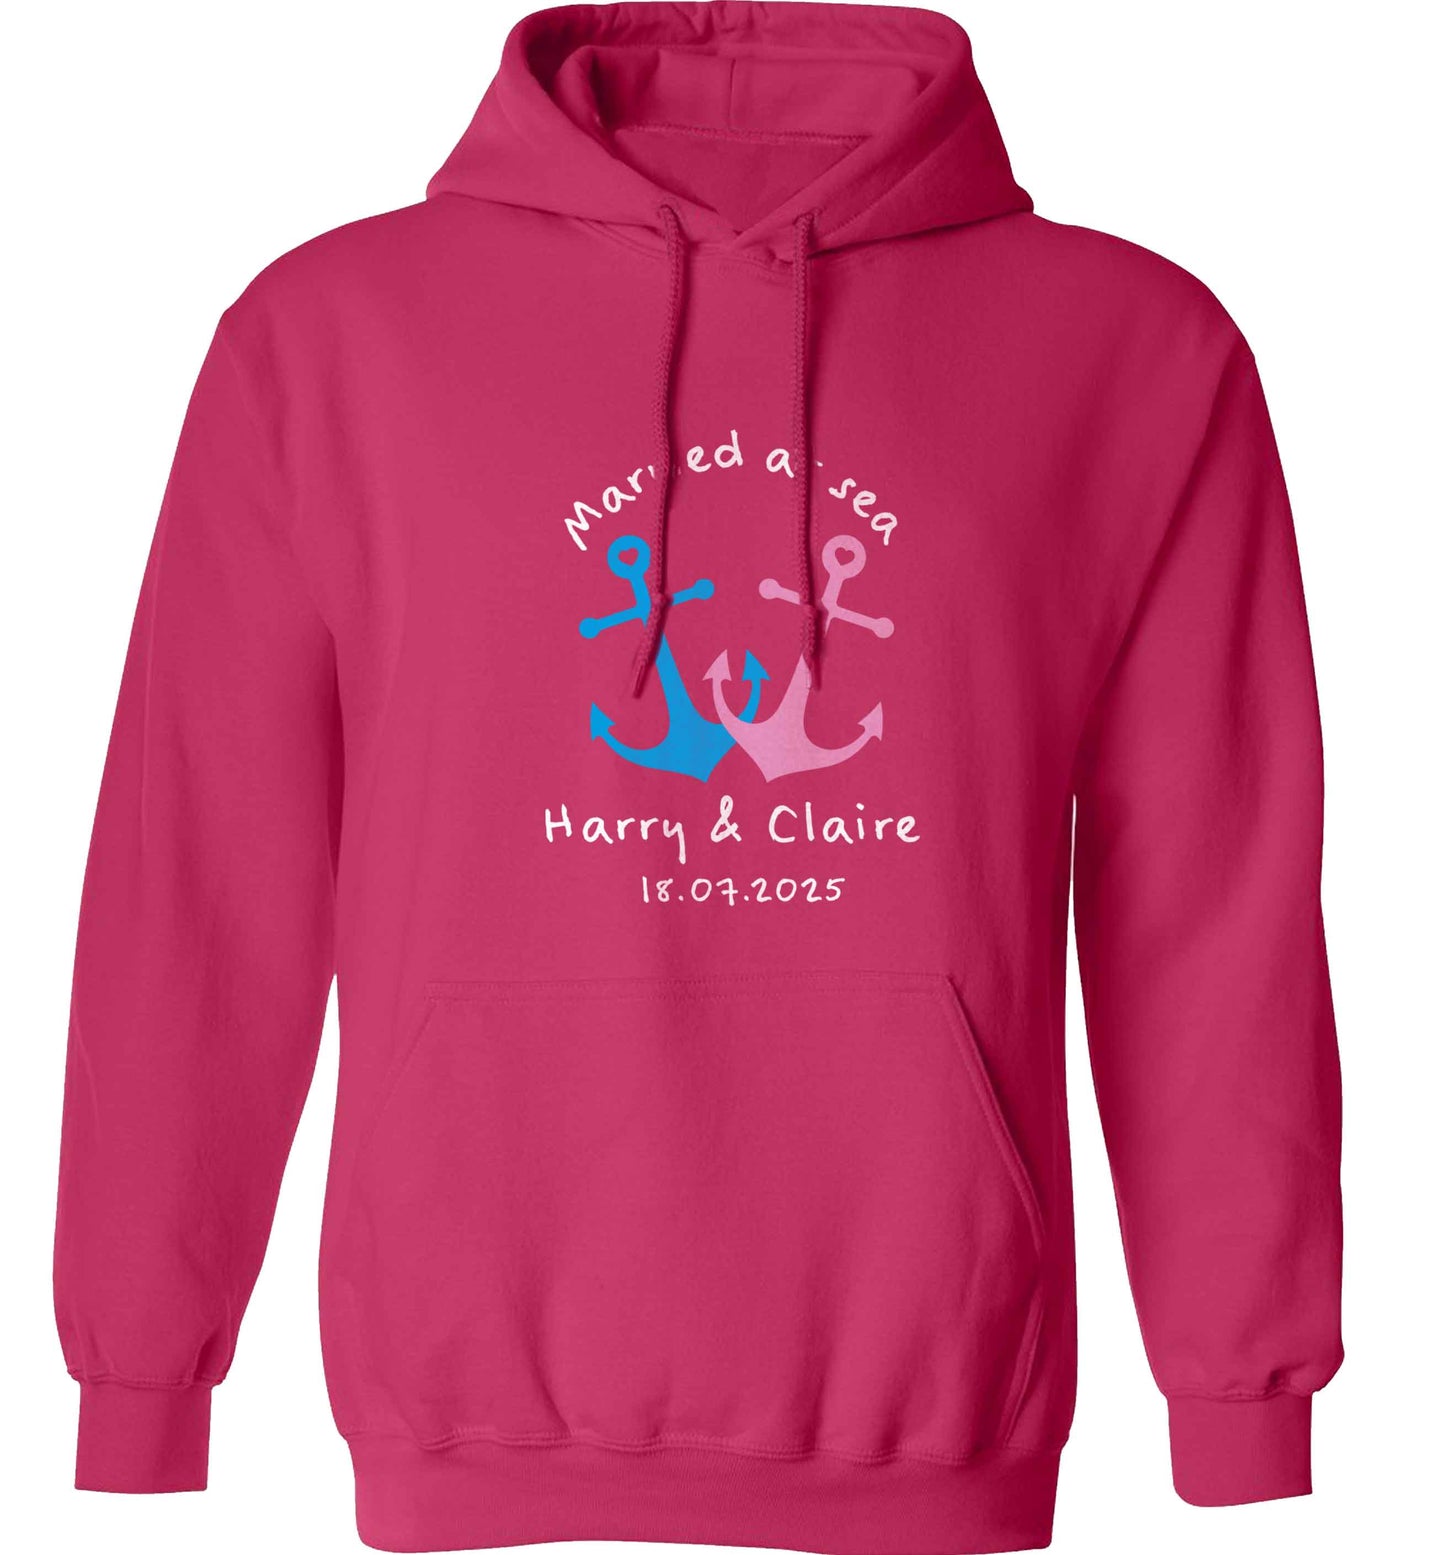 Married at sea adults unisex pink hoodie 2XL